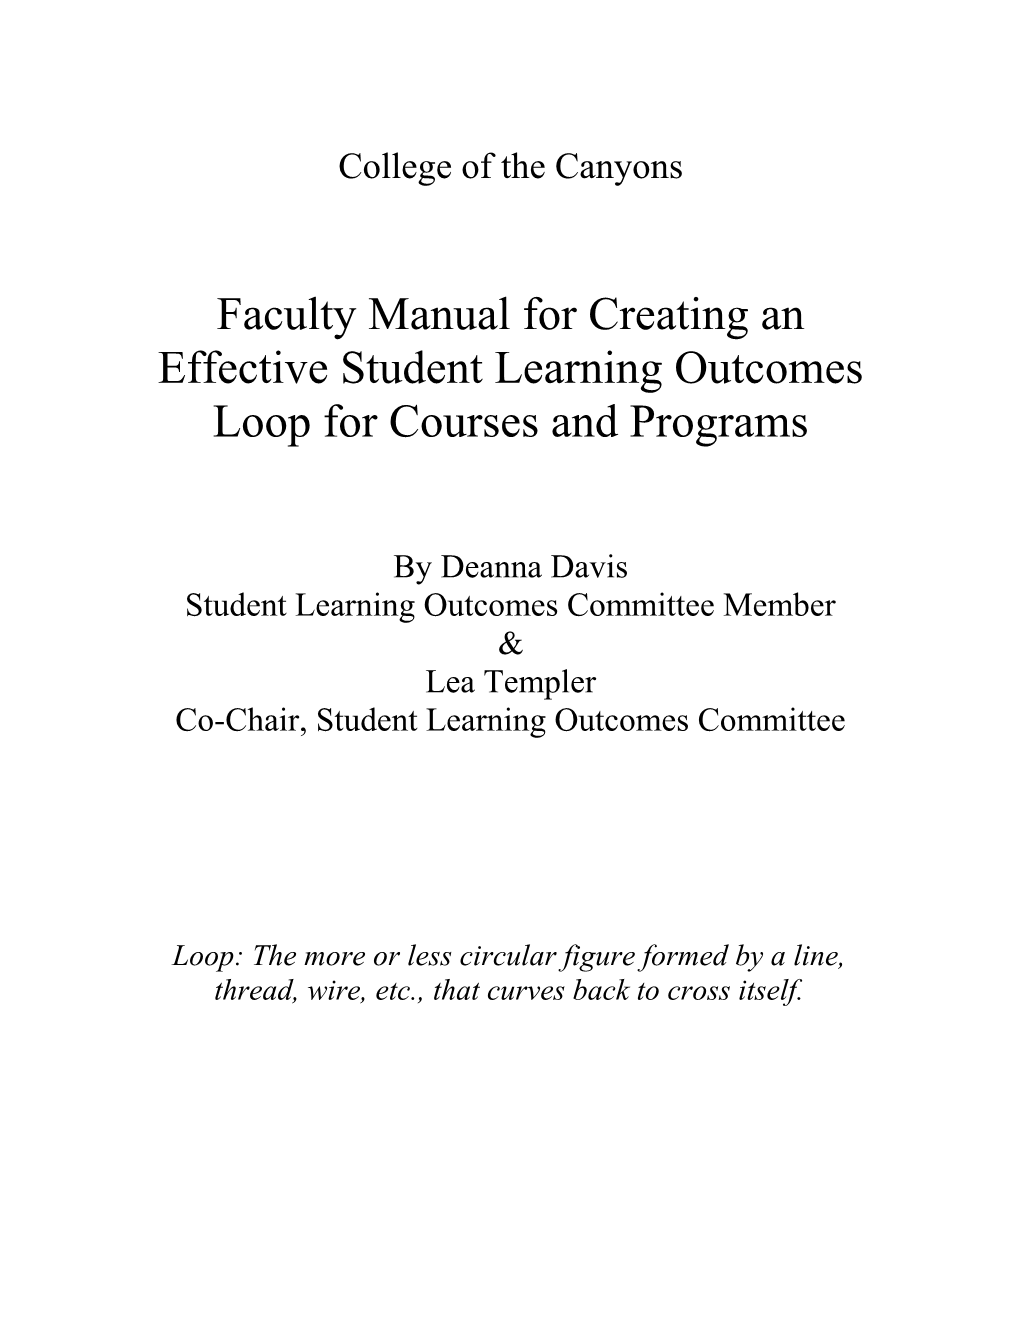 Faculty Manual for Creating an Effective Student Learning Outcomes Loop for Courses and Programs